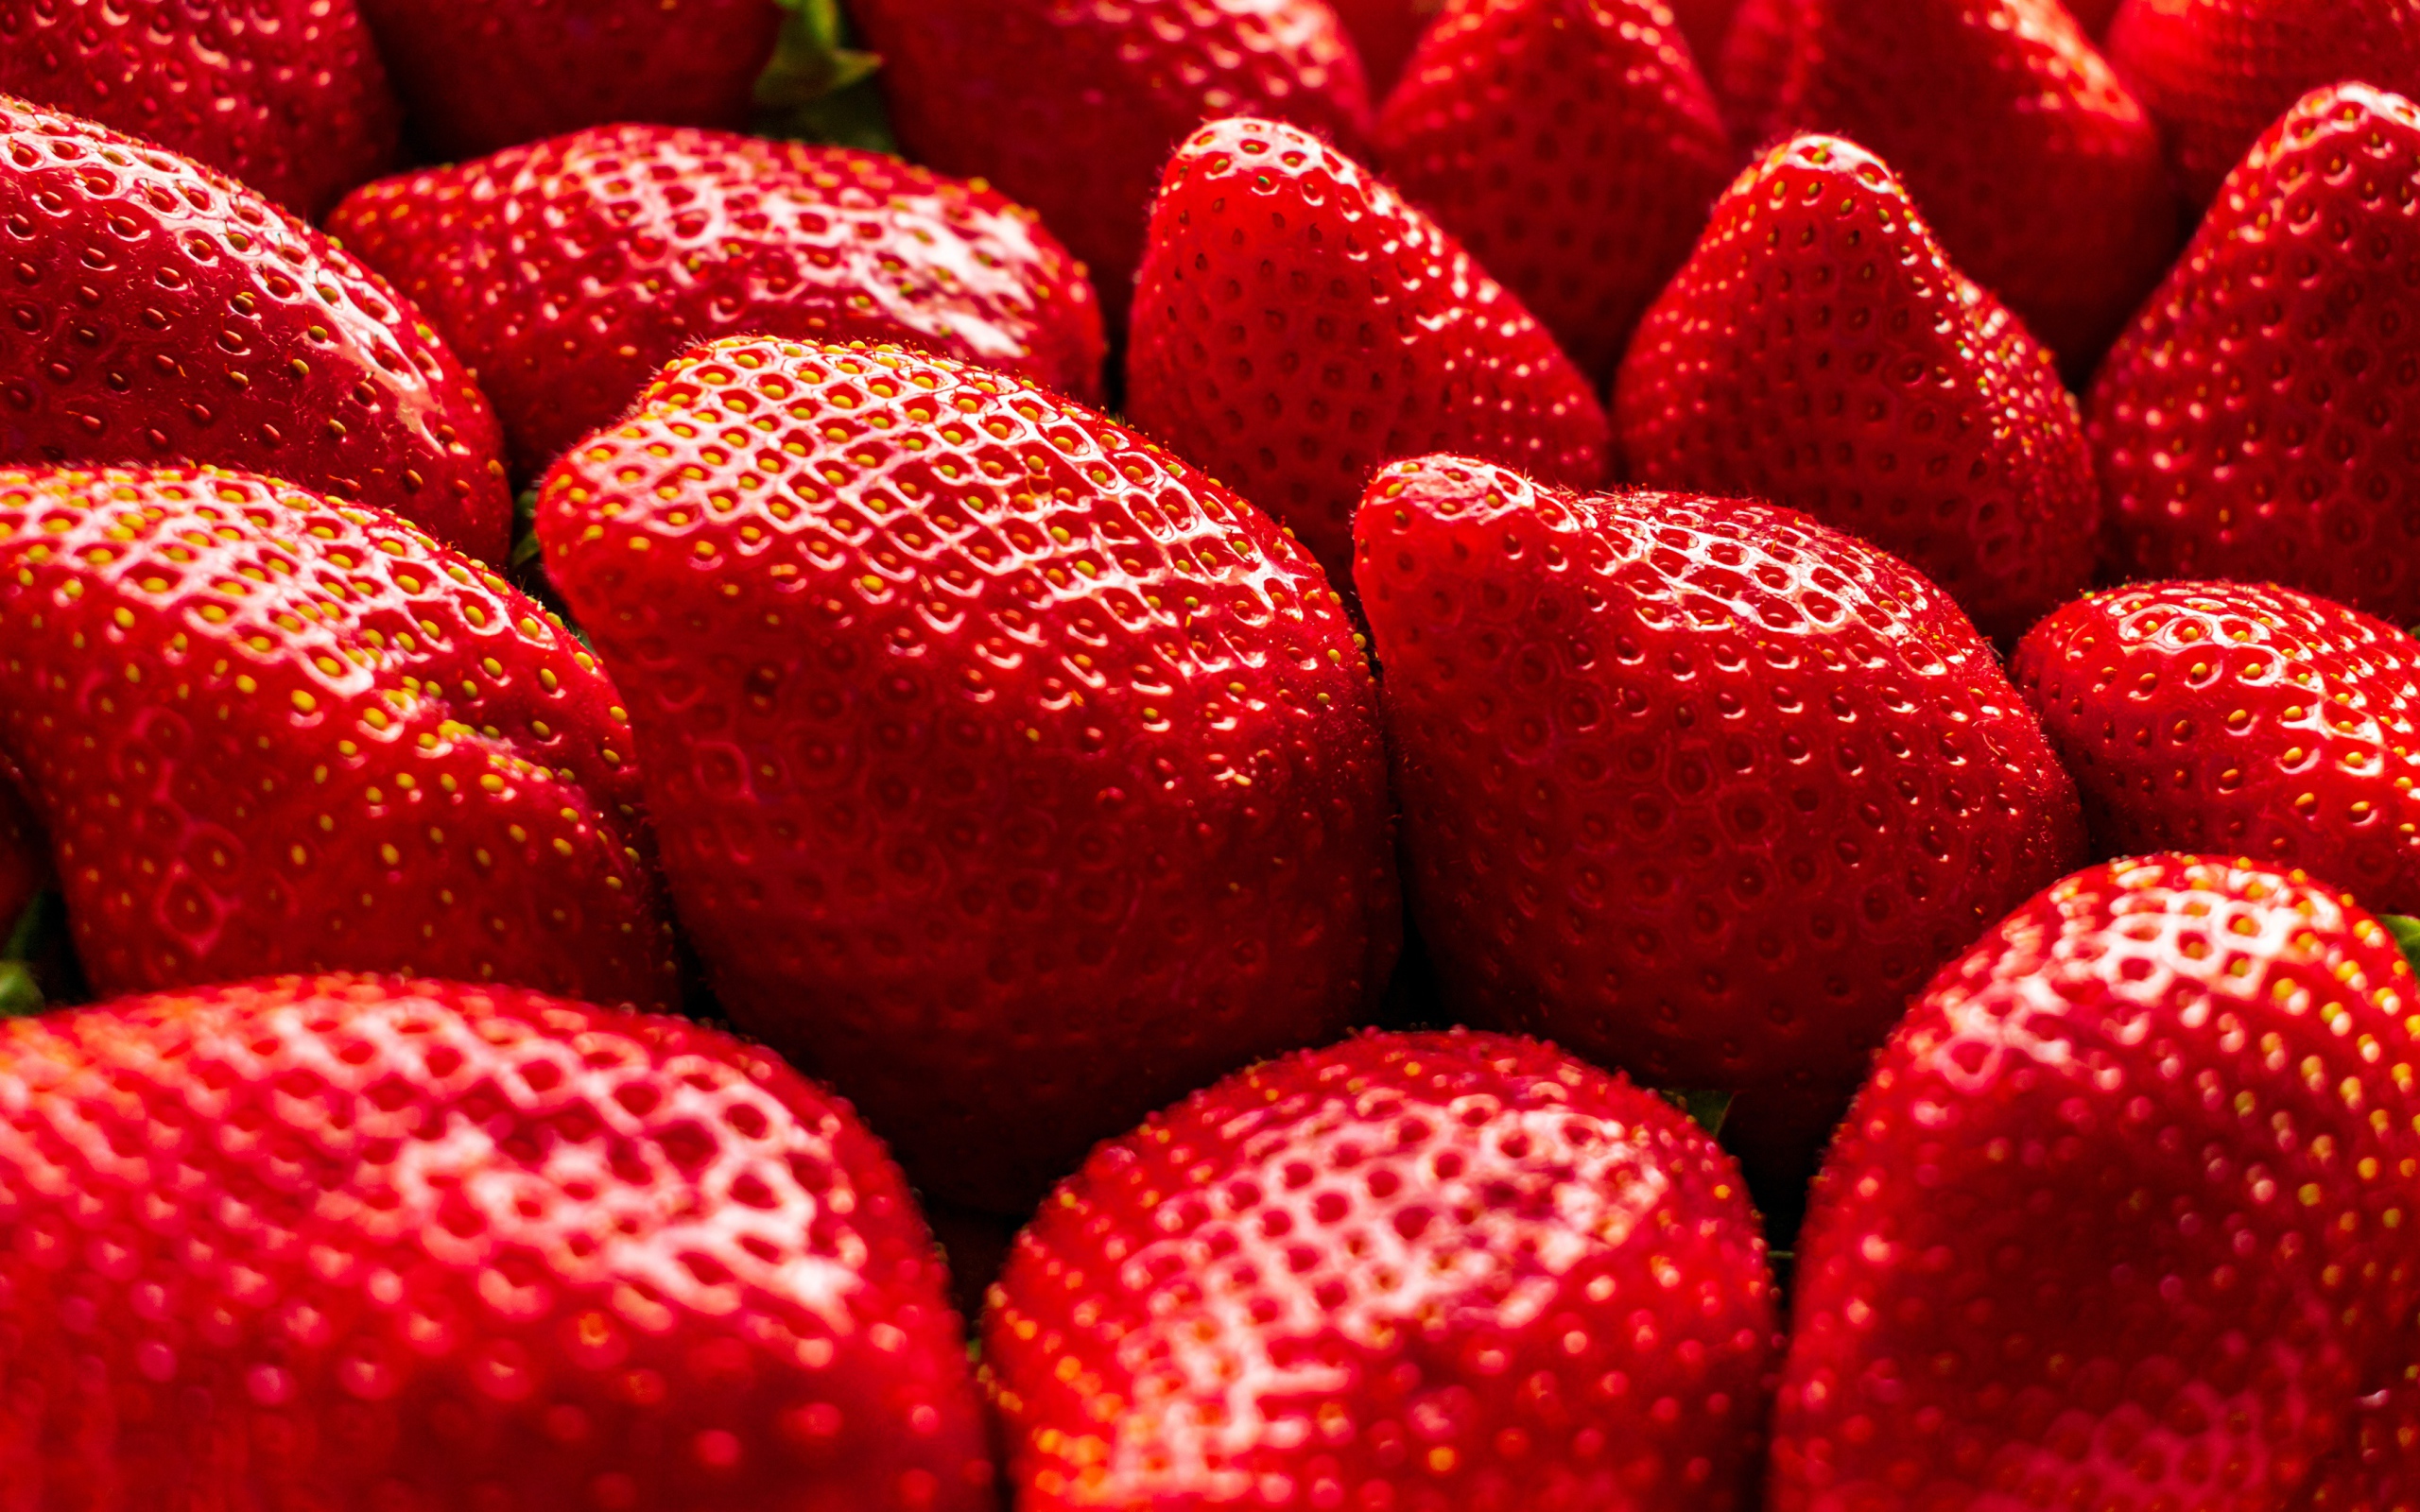 Lots of sweet ripe red strawberries close up